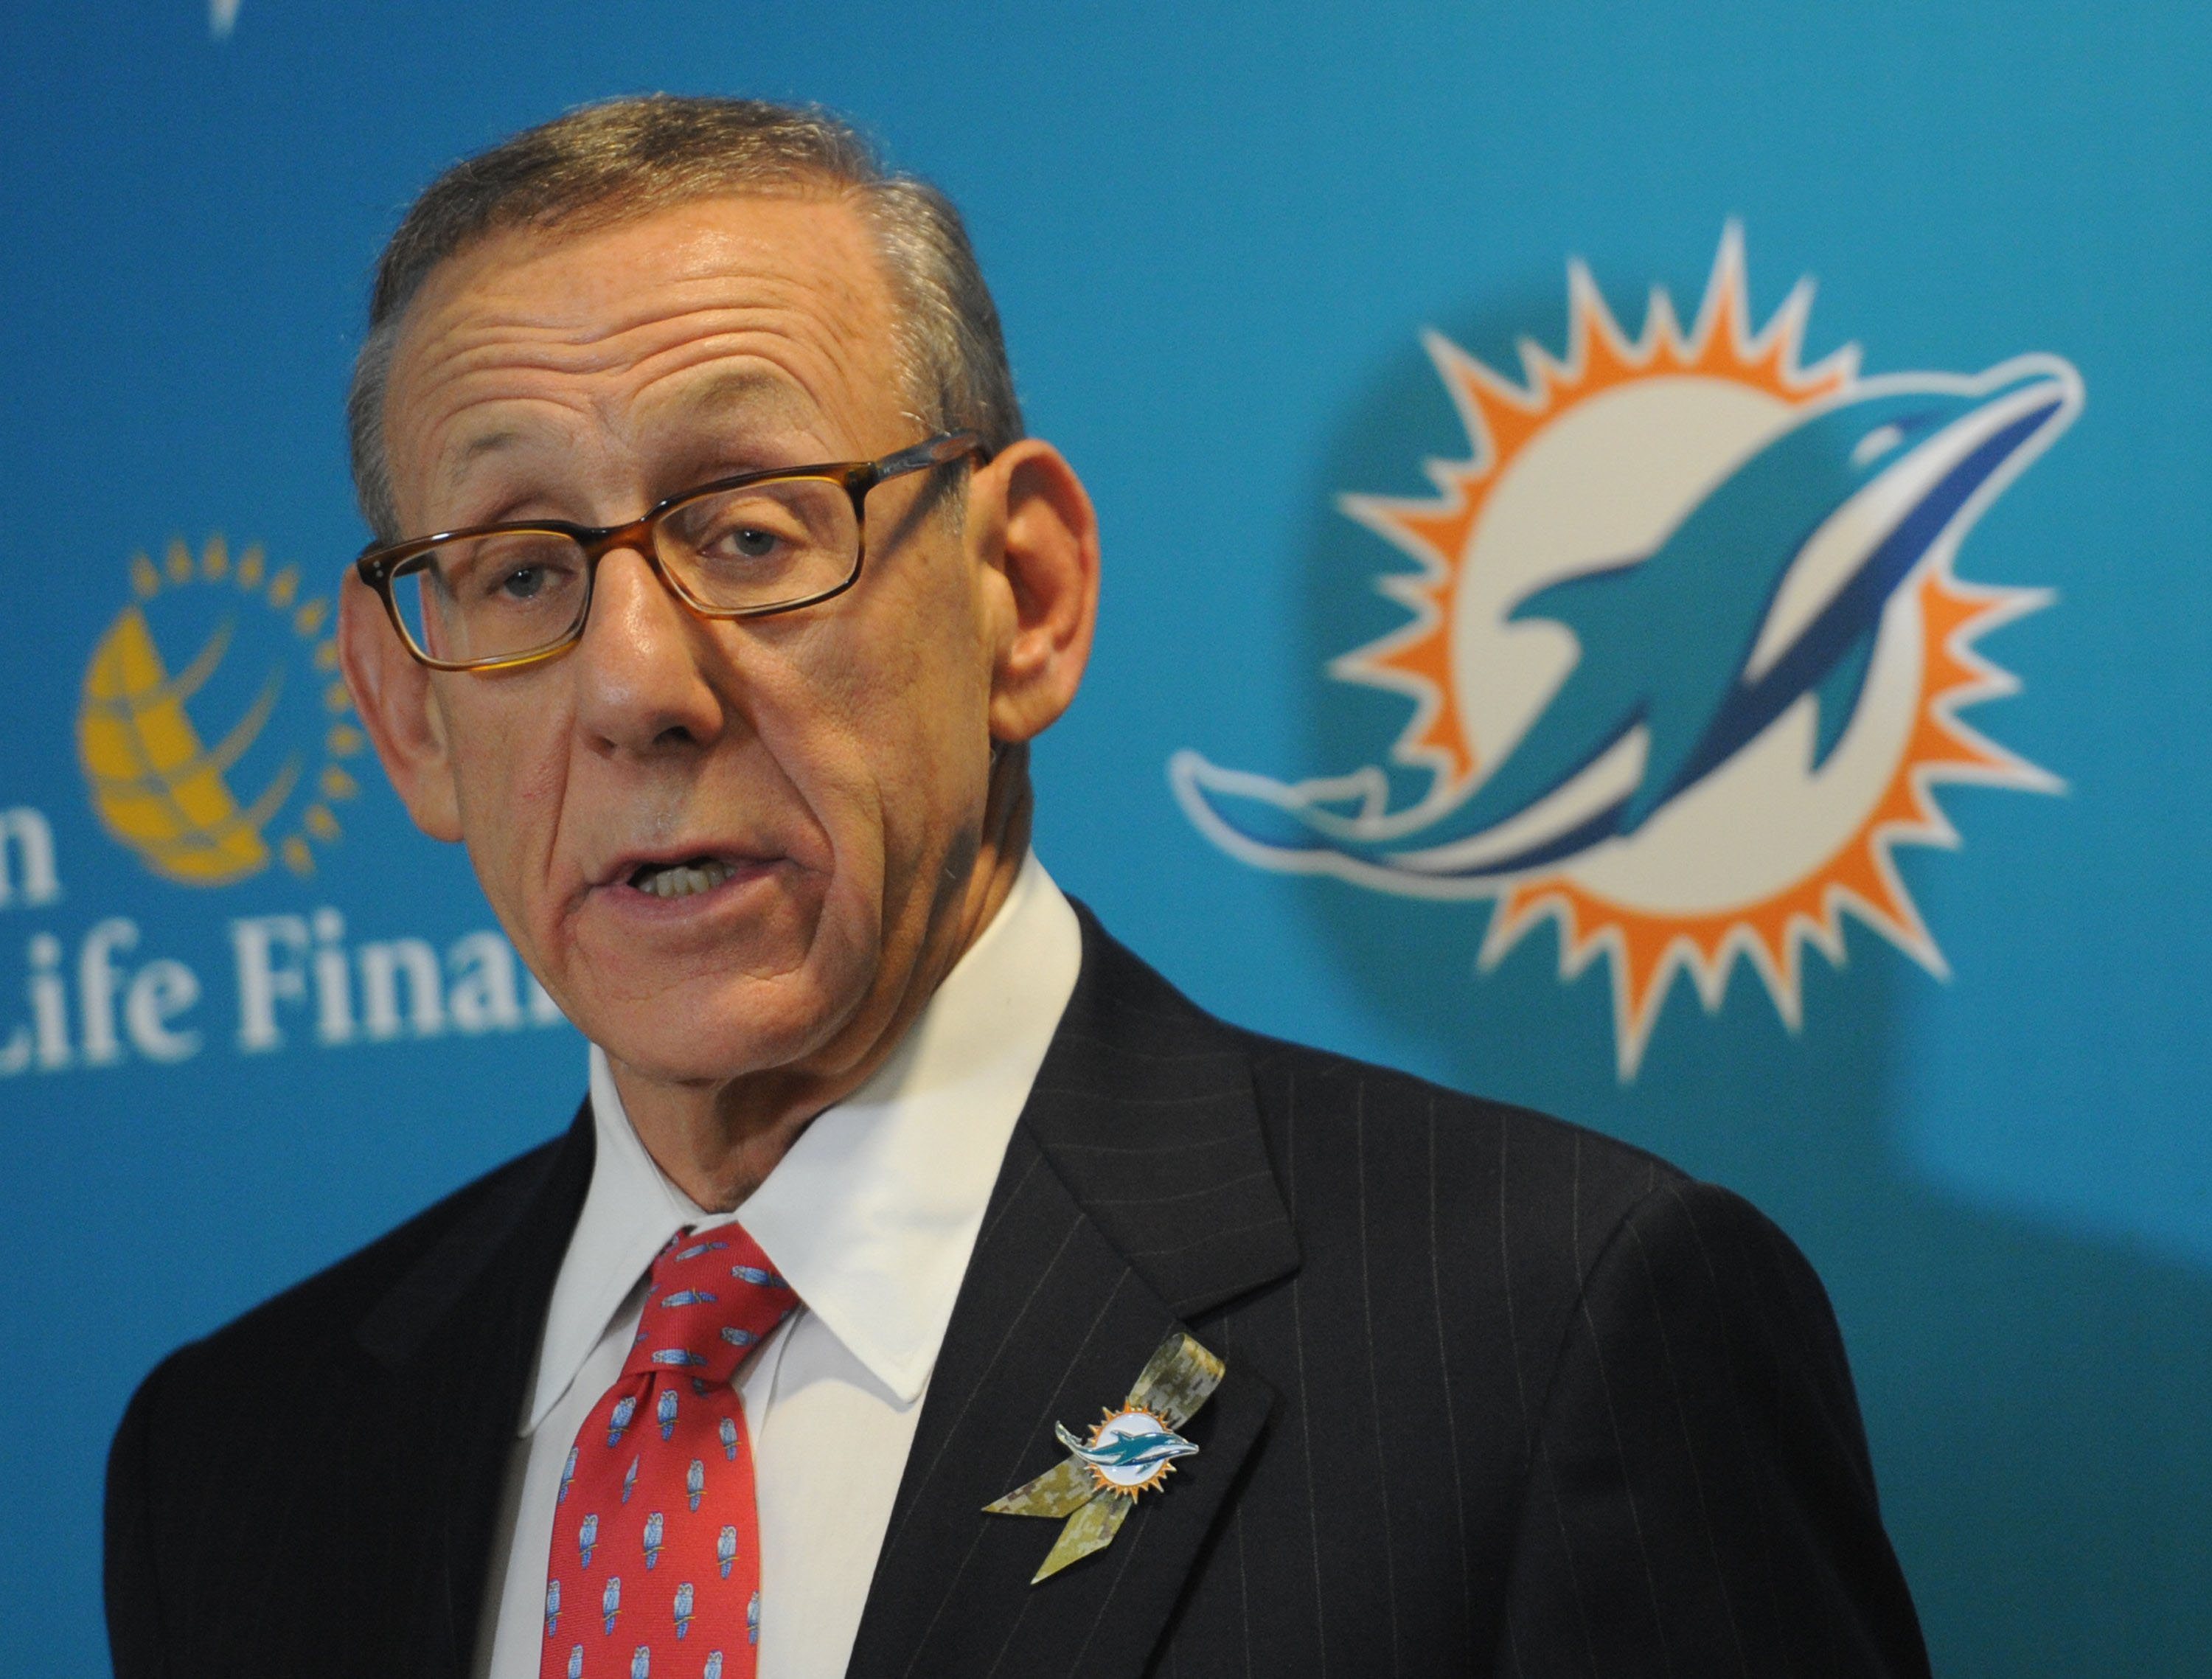 Stephen Ross, owner of the Miami Dolphins. (Sun Sentinel&mdash;MCT via Getty Images)